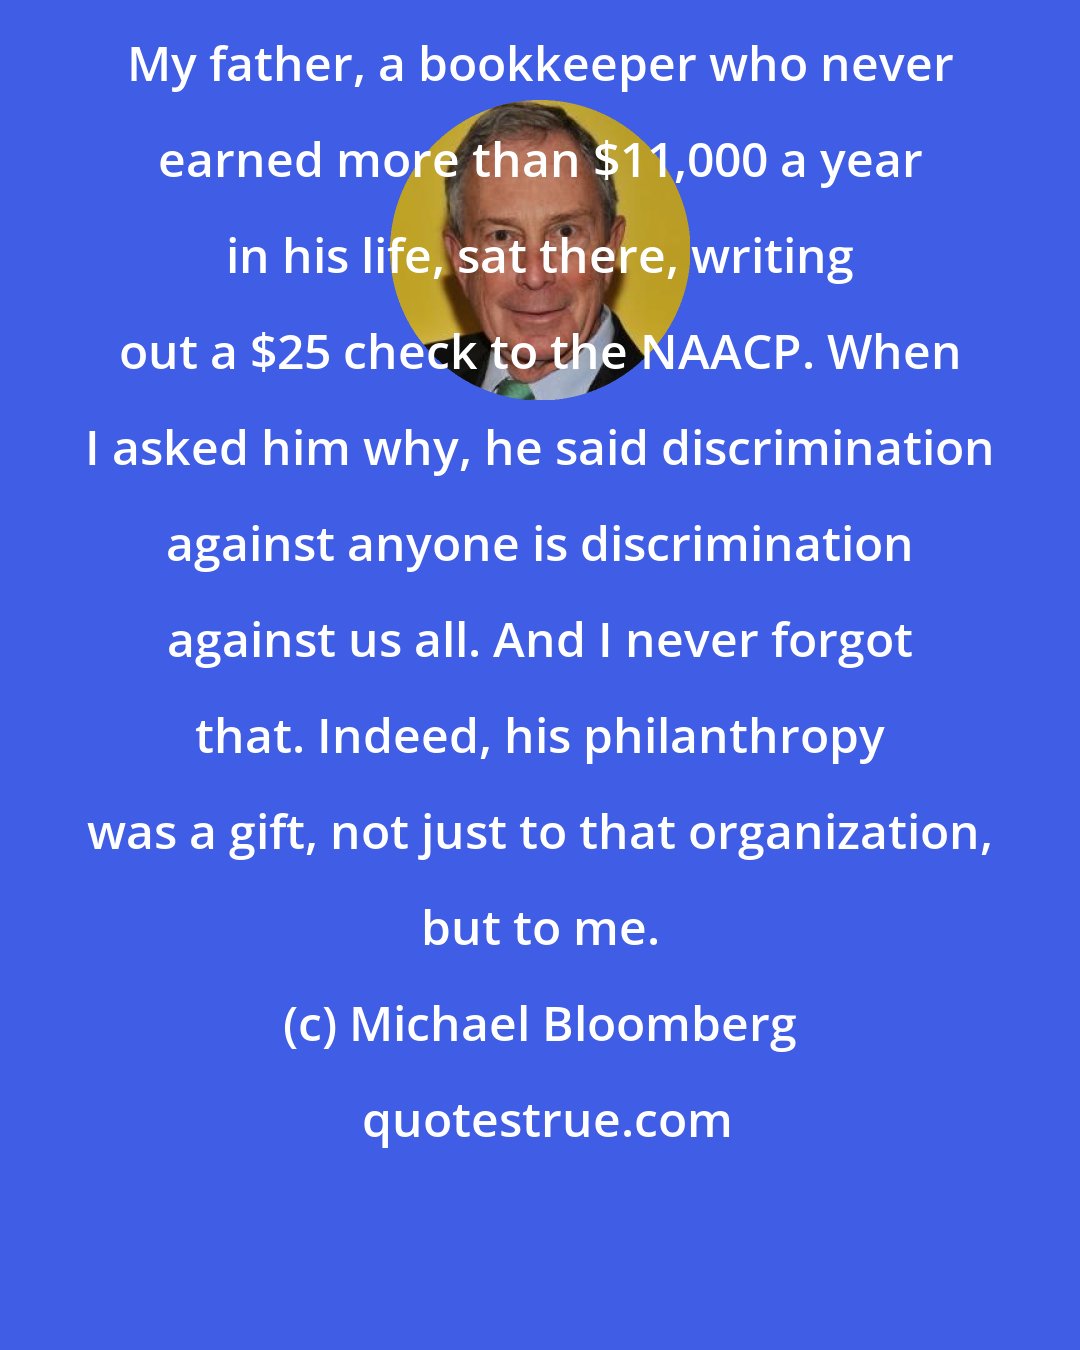 Michael Bloomberg: My father, a bookkeeper who never earned more than $11,000 a year in his life, sat there, writing out a $25 check to the NAACP. When I asked him why, he said discrimination against anyone is discrimination against us all. And I never forgot that. Indeed, his philanthropy was a gift, not just to that organization, but to me.